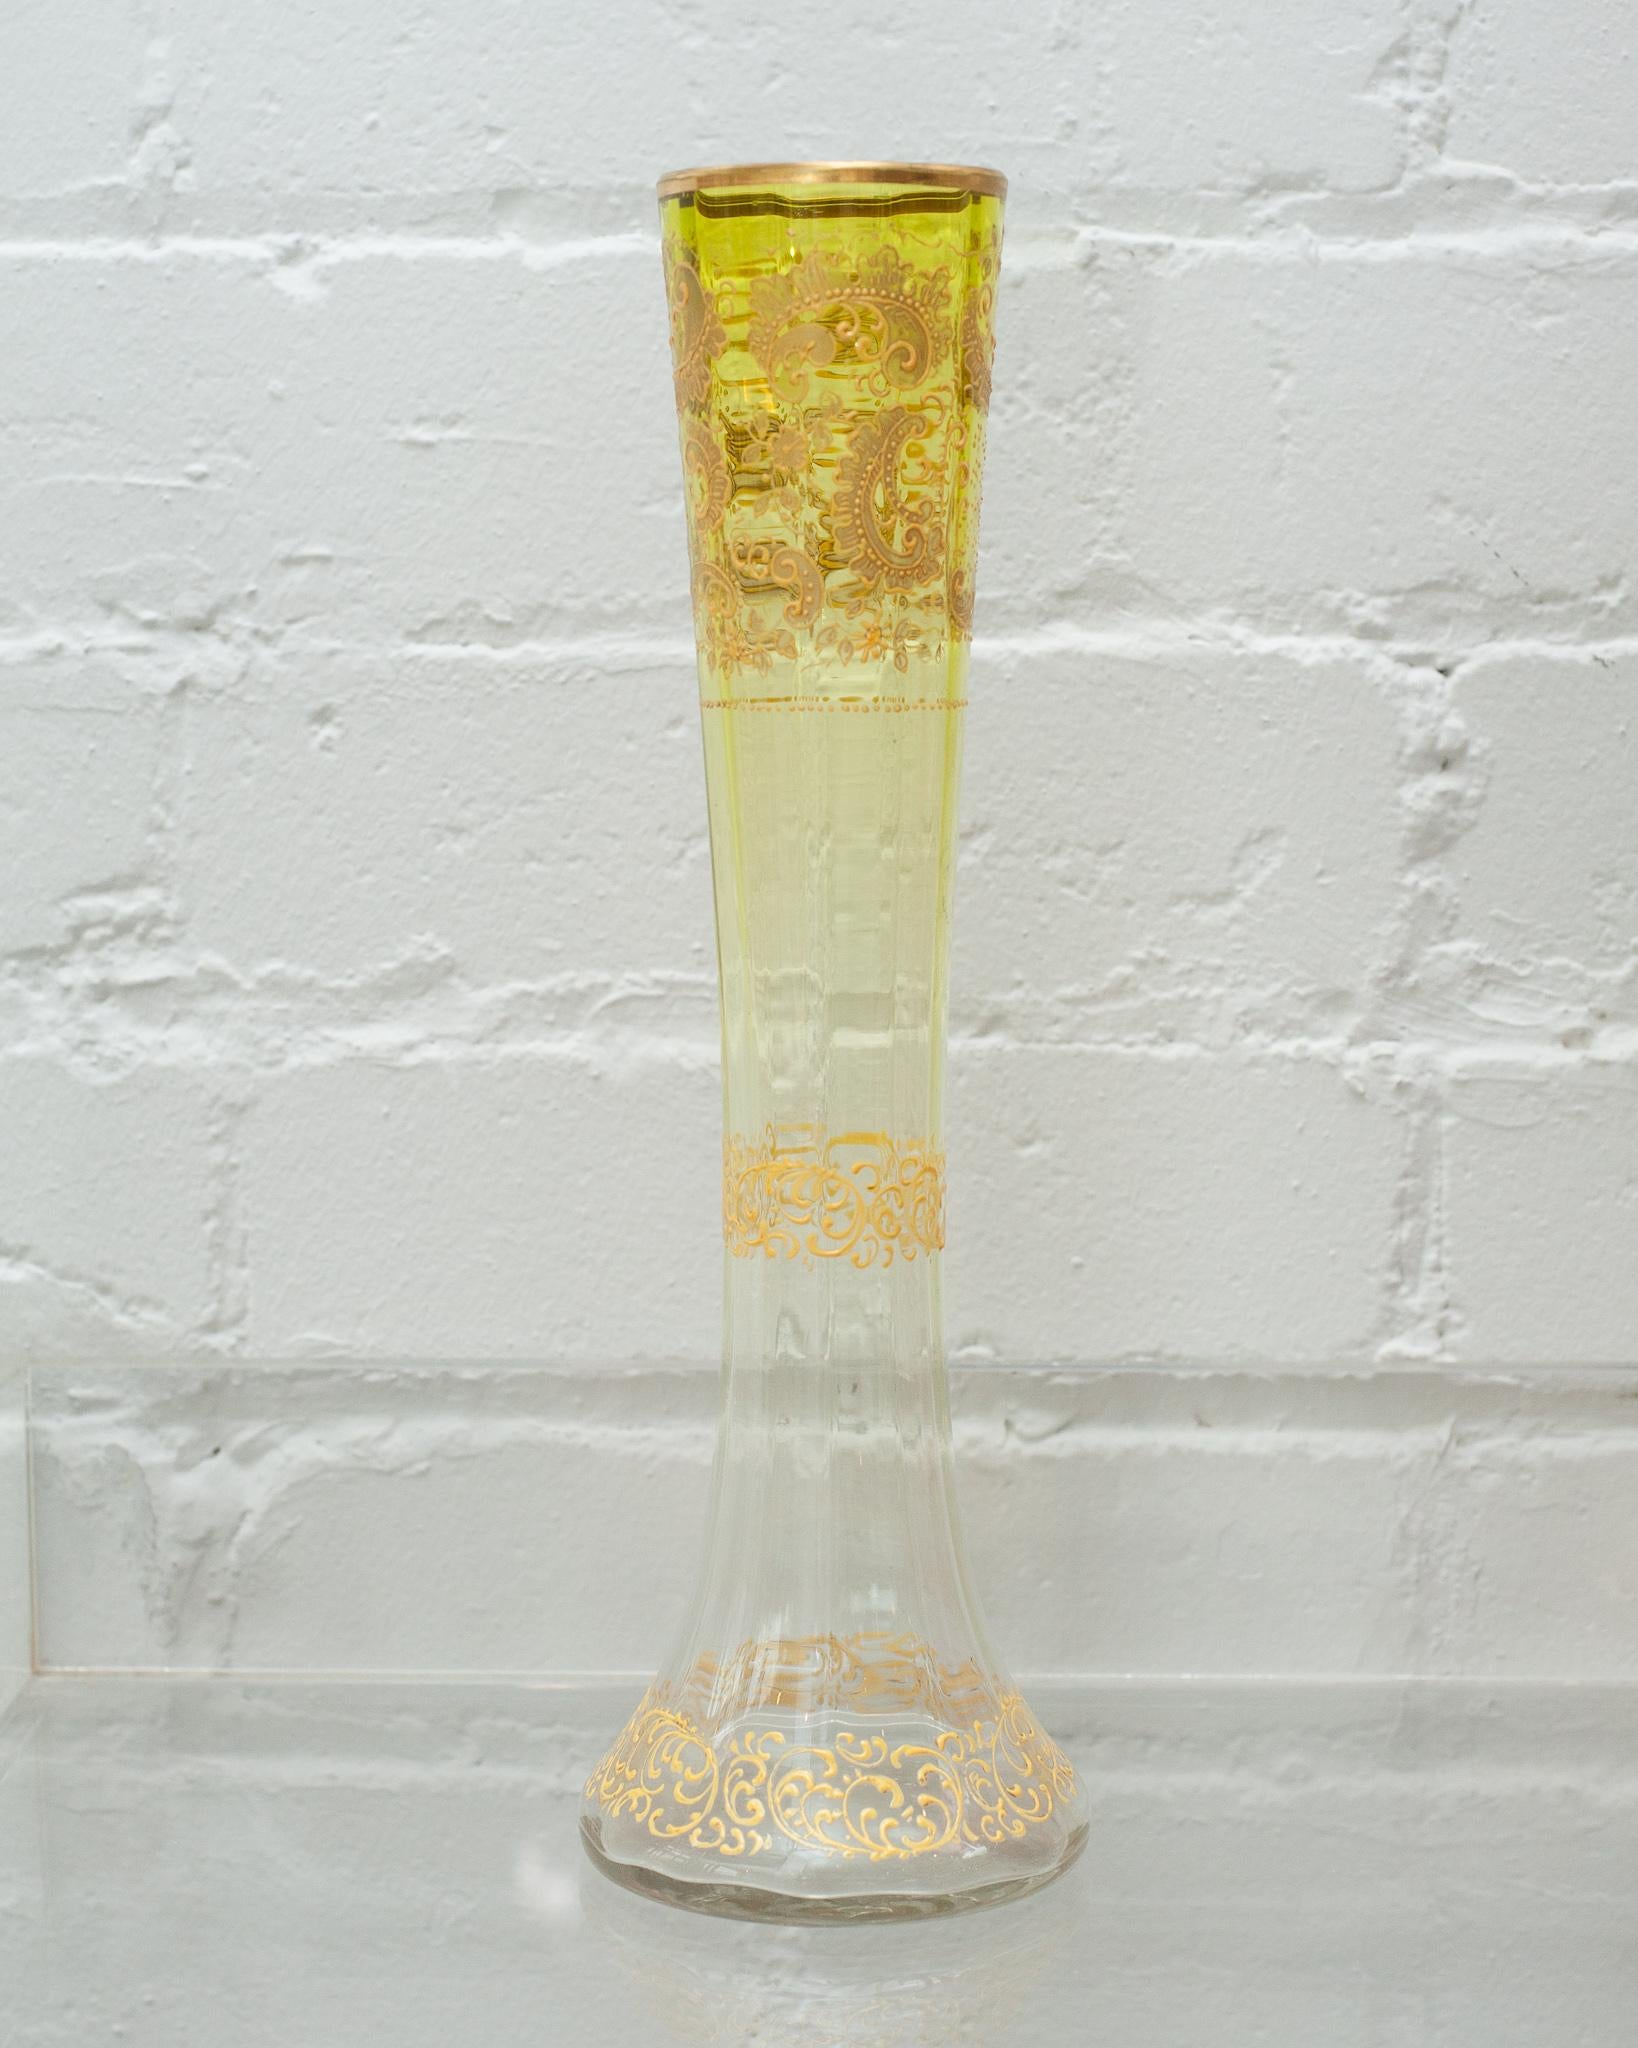 A beautiful antique Moser flared vase in yellow to clear faded crystal, with gold gilded details. Beautifully made and in excellent condition for its age. A beautiful example of turn of the century Bohemian craftsmanship.